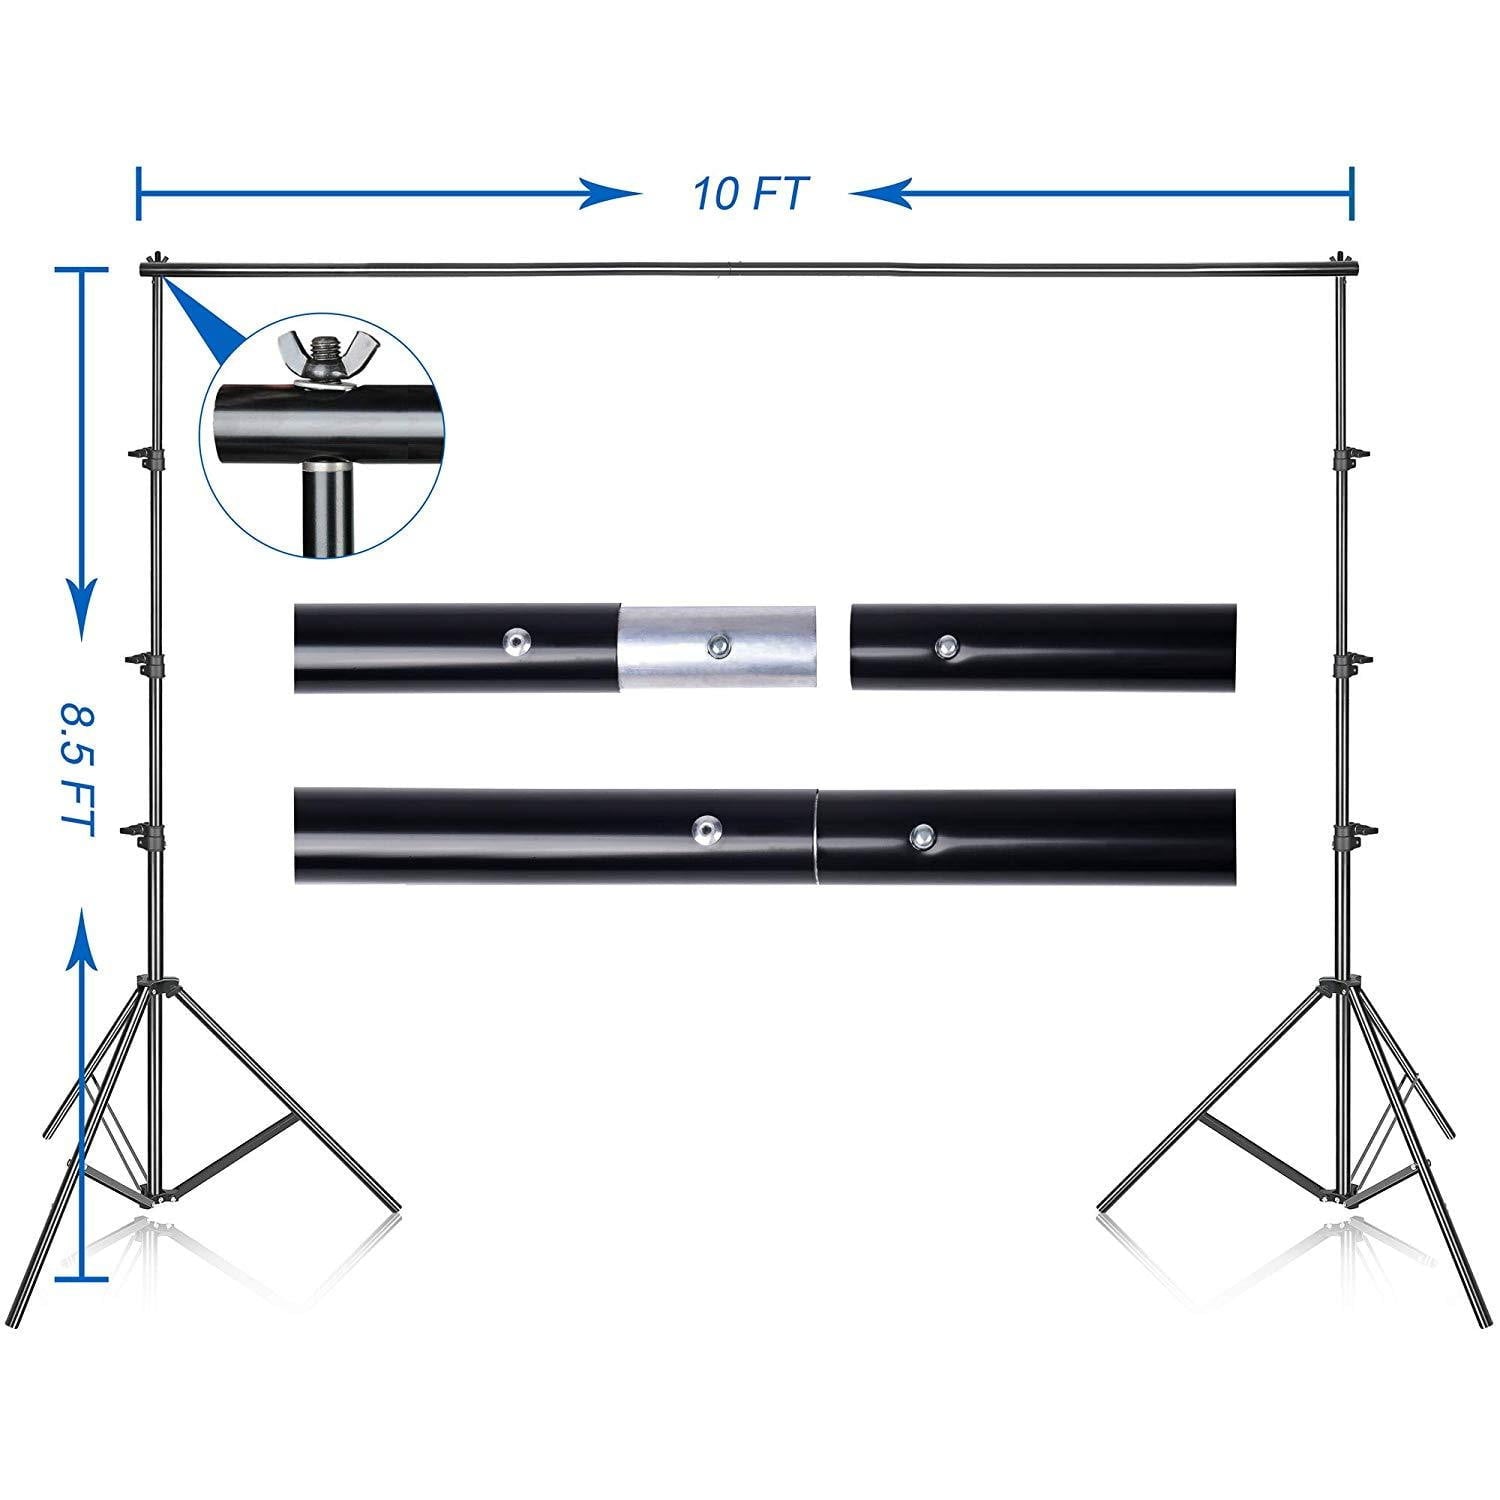 8.5 x 10 ft Photo Stand Kit with 10 x 12 ft Cotton Muslin Backdrop